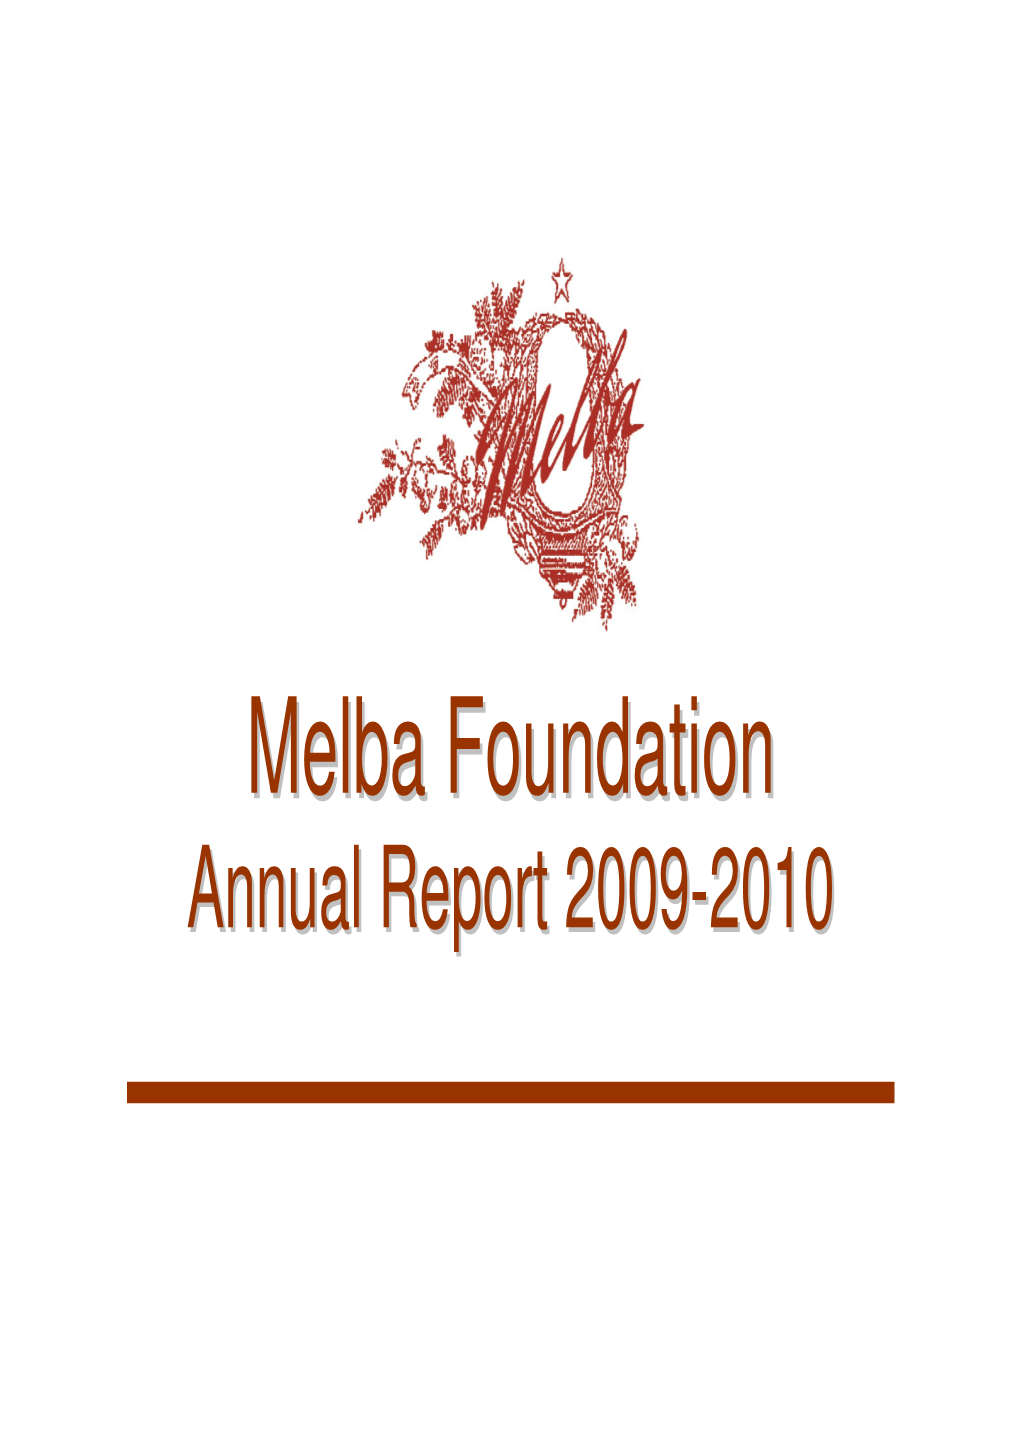 Melba Foundation, 2009-10 Has Been a Year of Success on Many Fronts